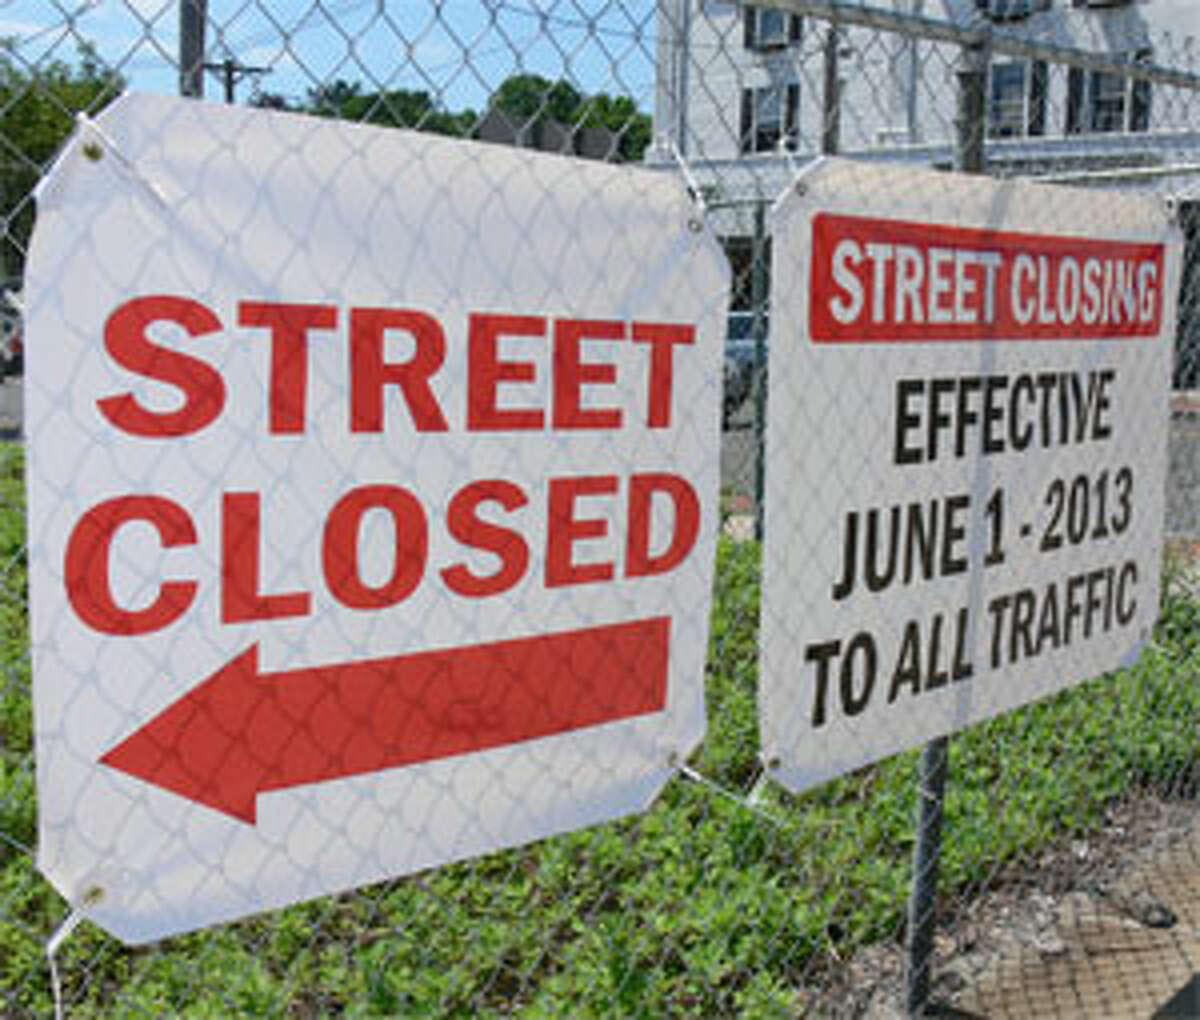 A new sign declaring Bridge Street Southwest is “closed” recently was put up near the intersection of Bridge Street and Howe Avenue.